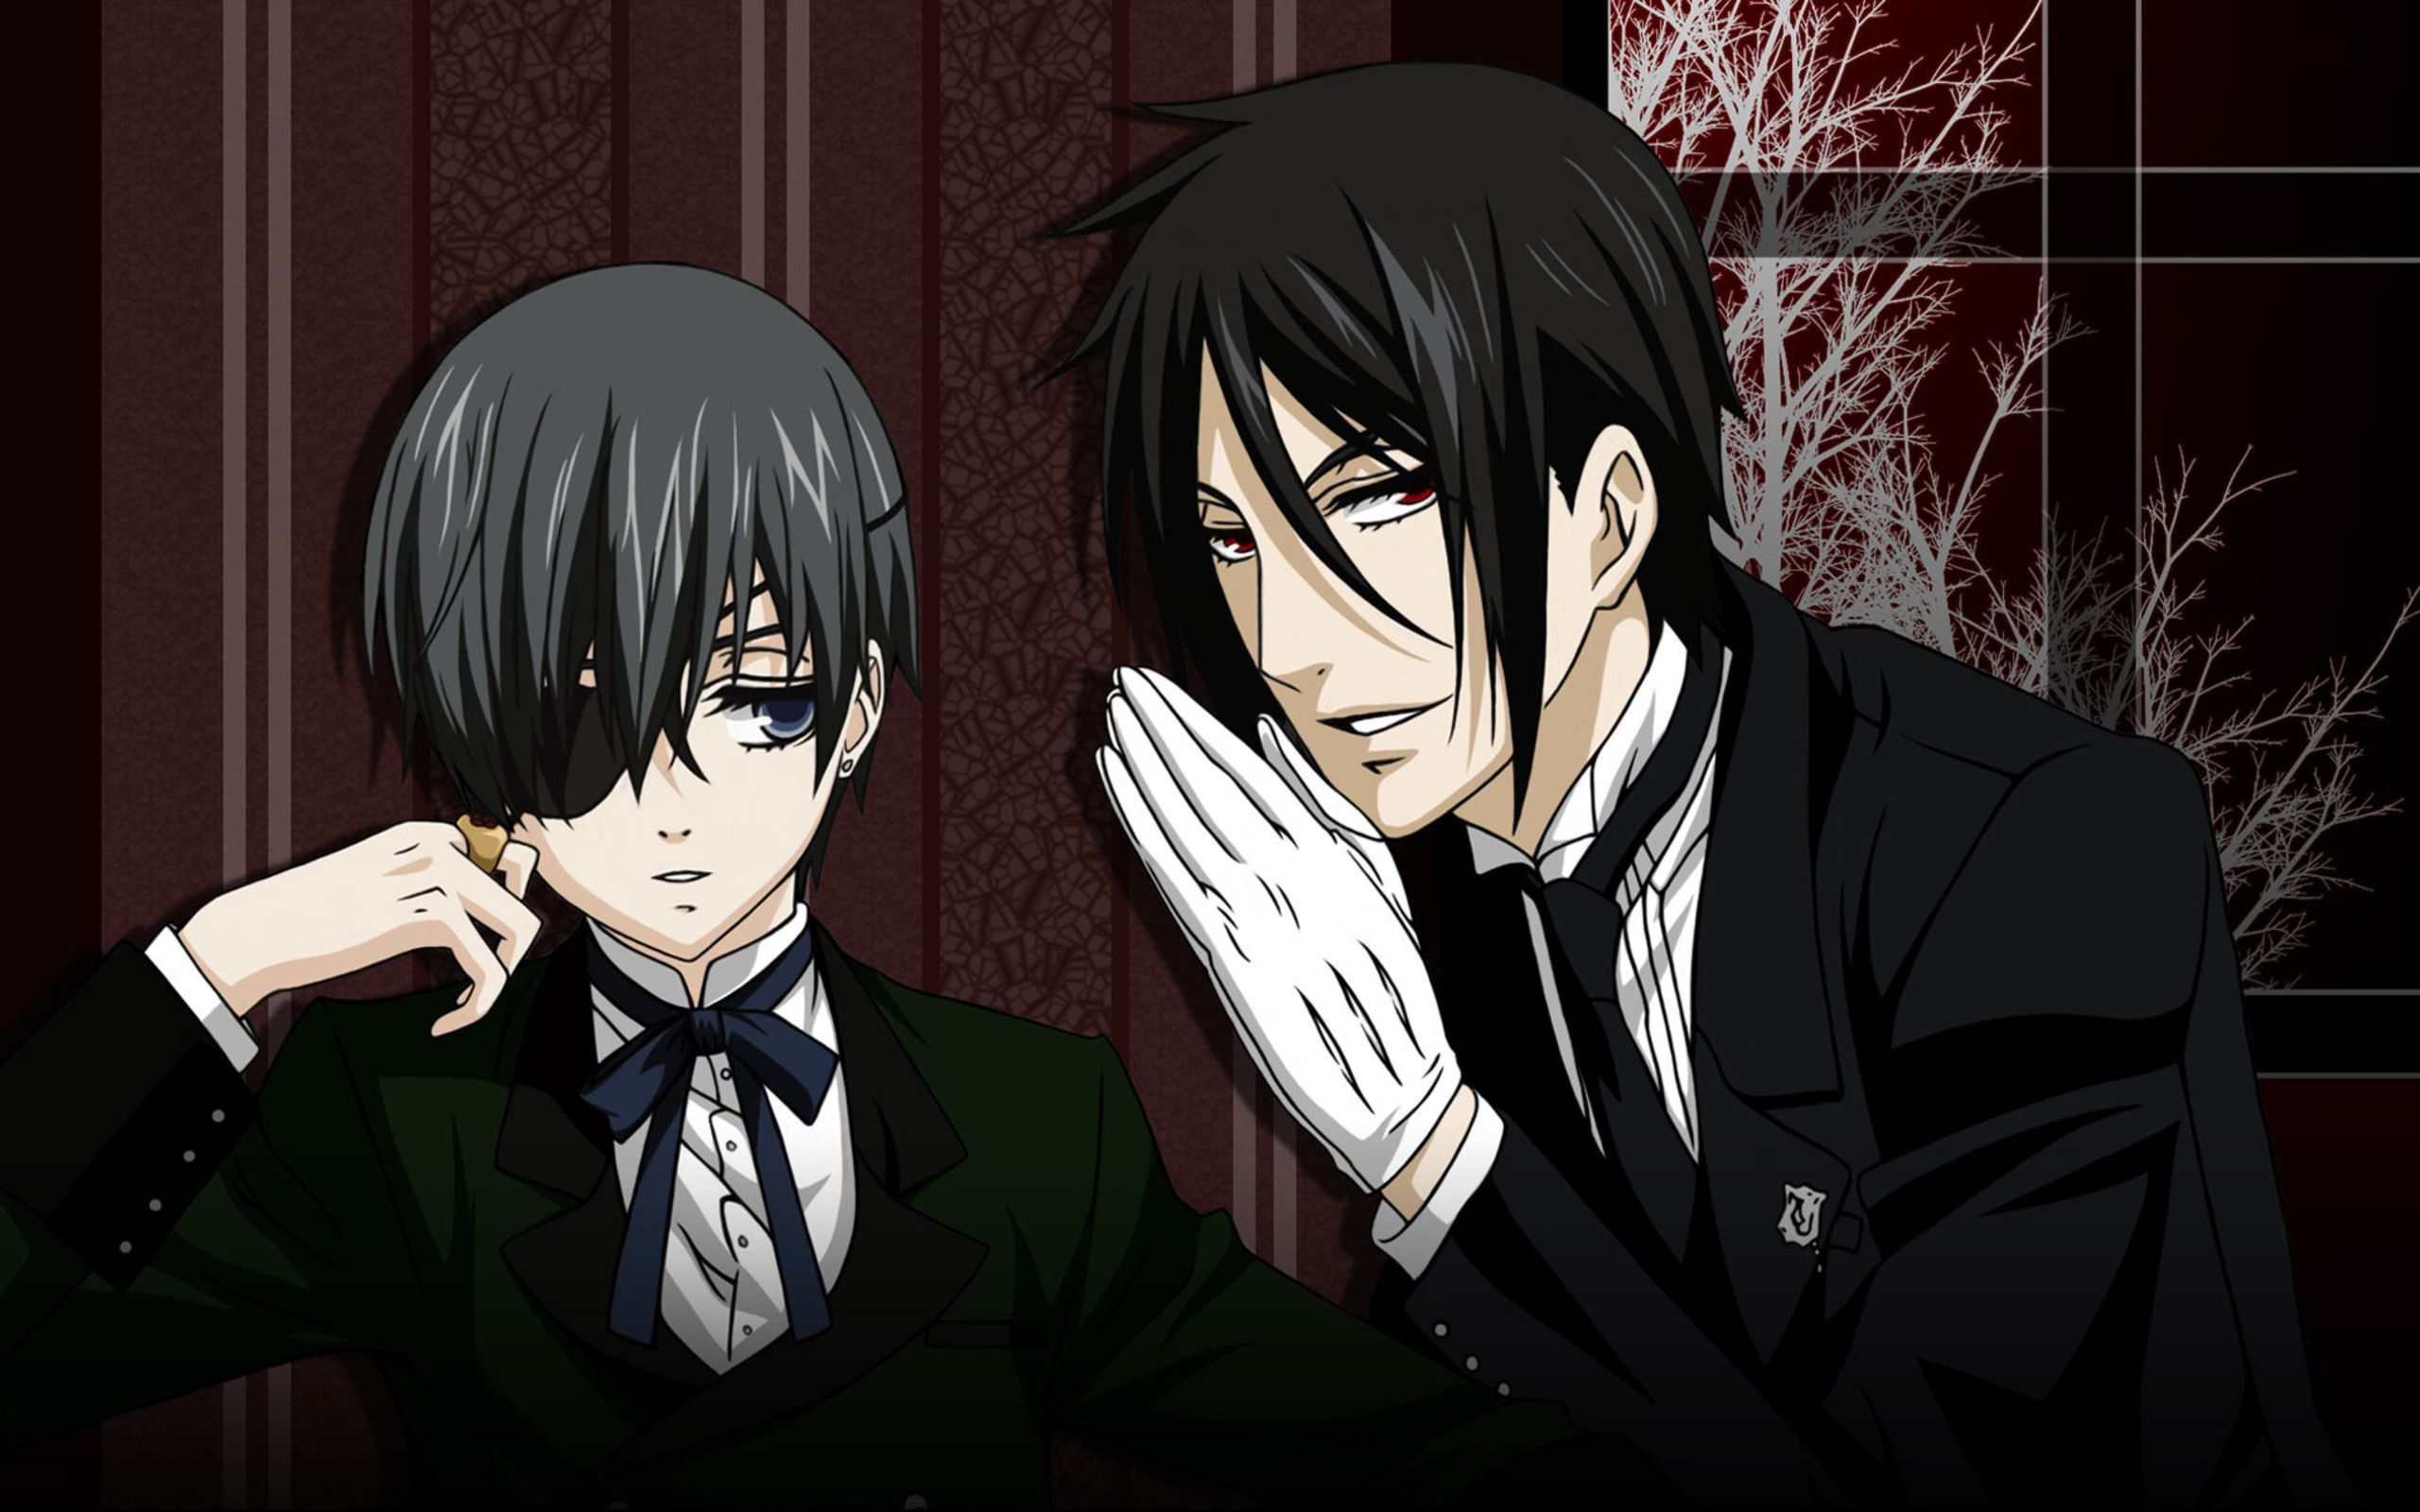 All the Main Characters in the 'Black Butler' Anime Series